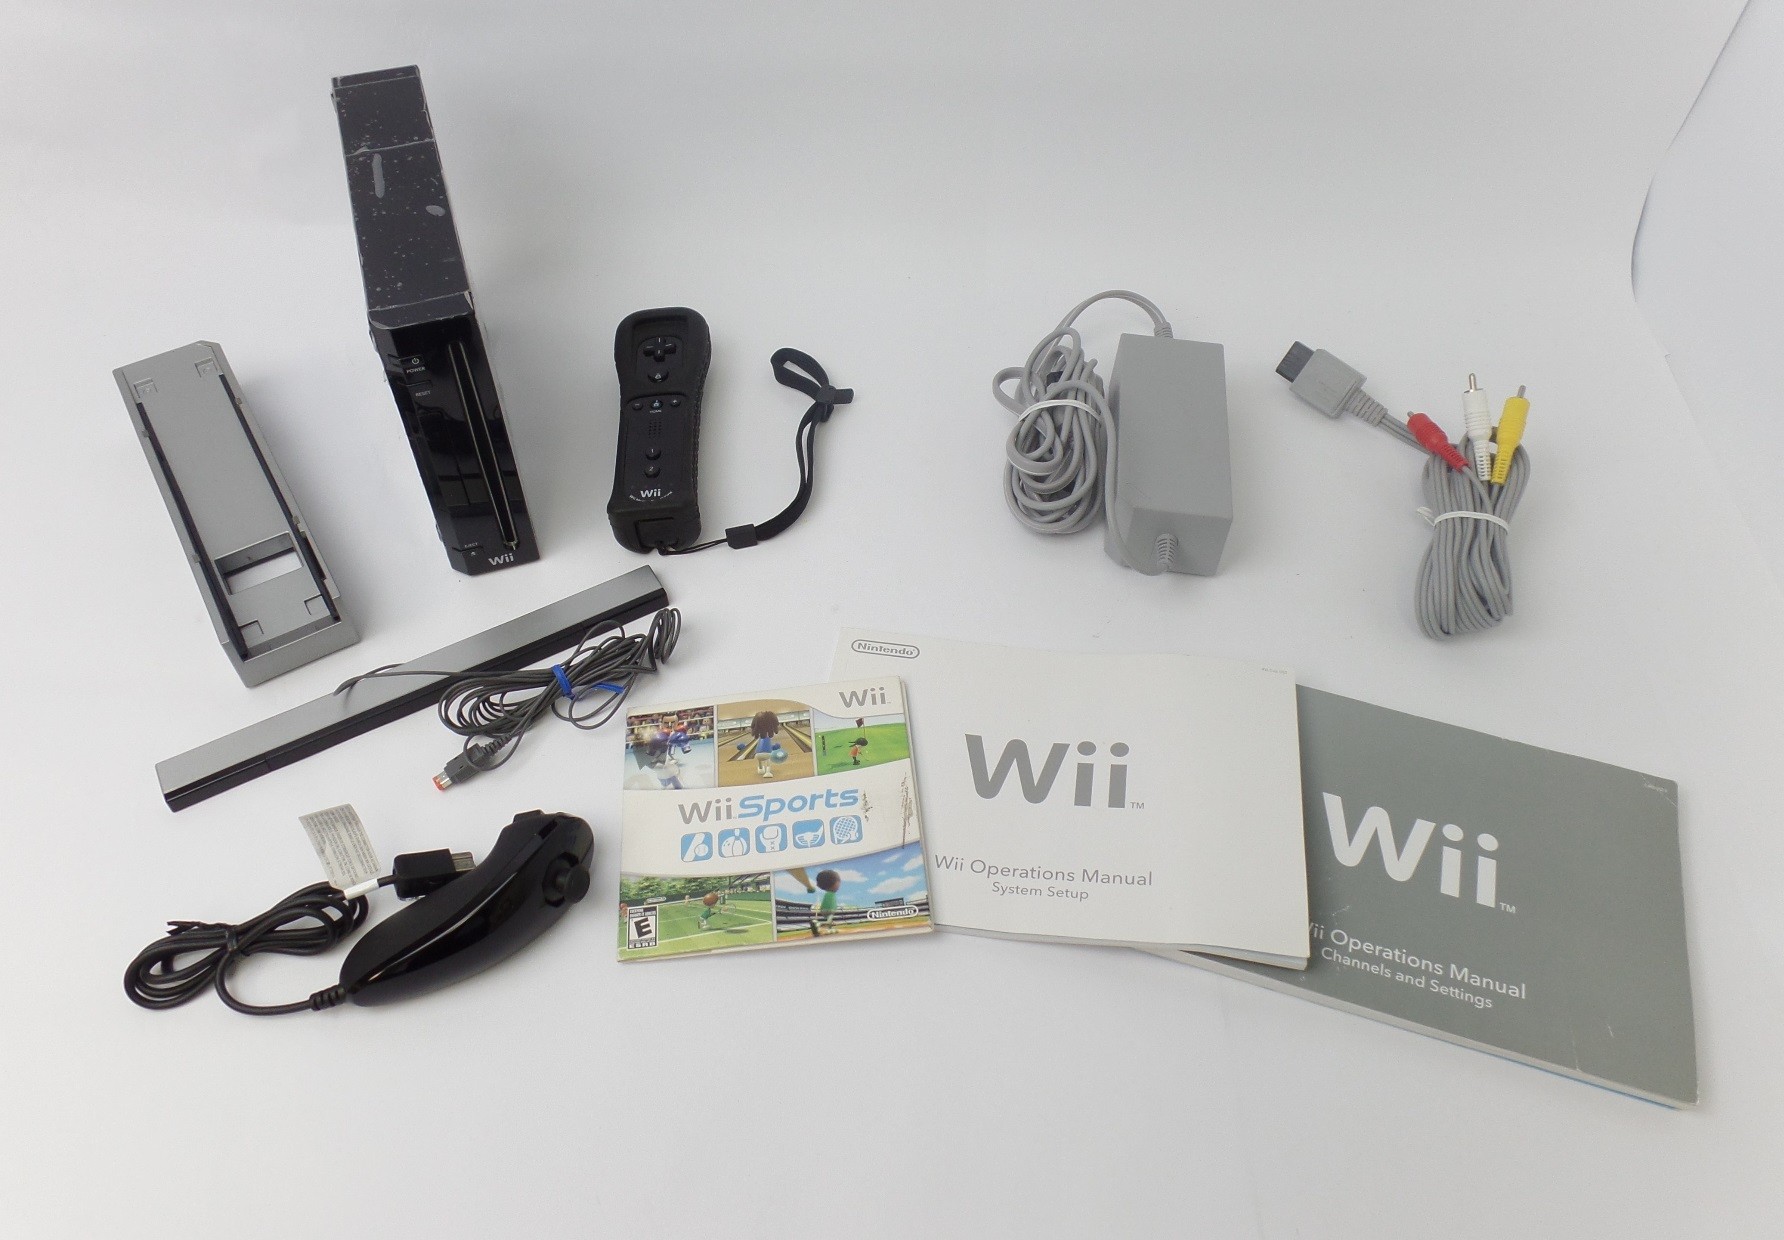 Read: issue. Nintendo RVL-001 Black Wii Gaming Console